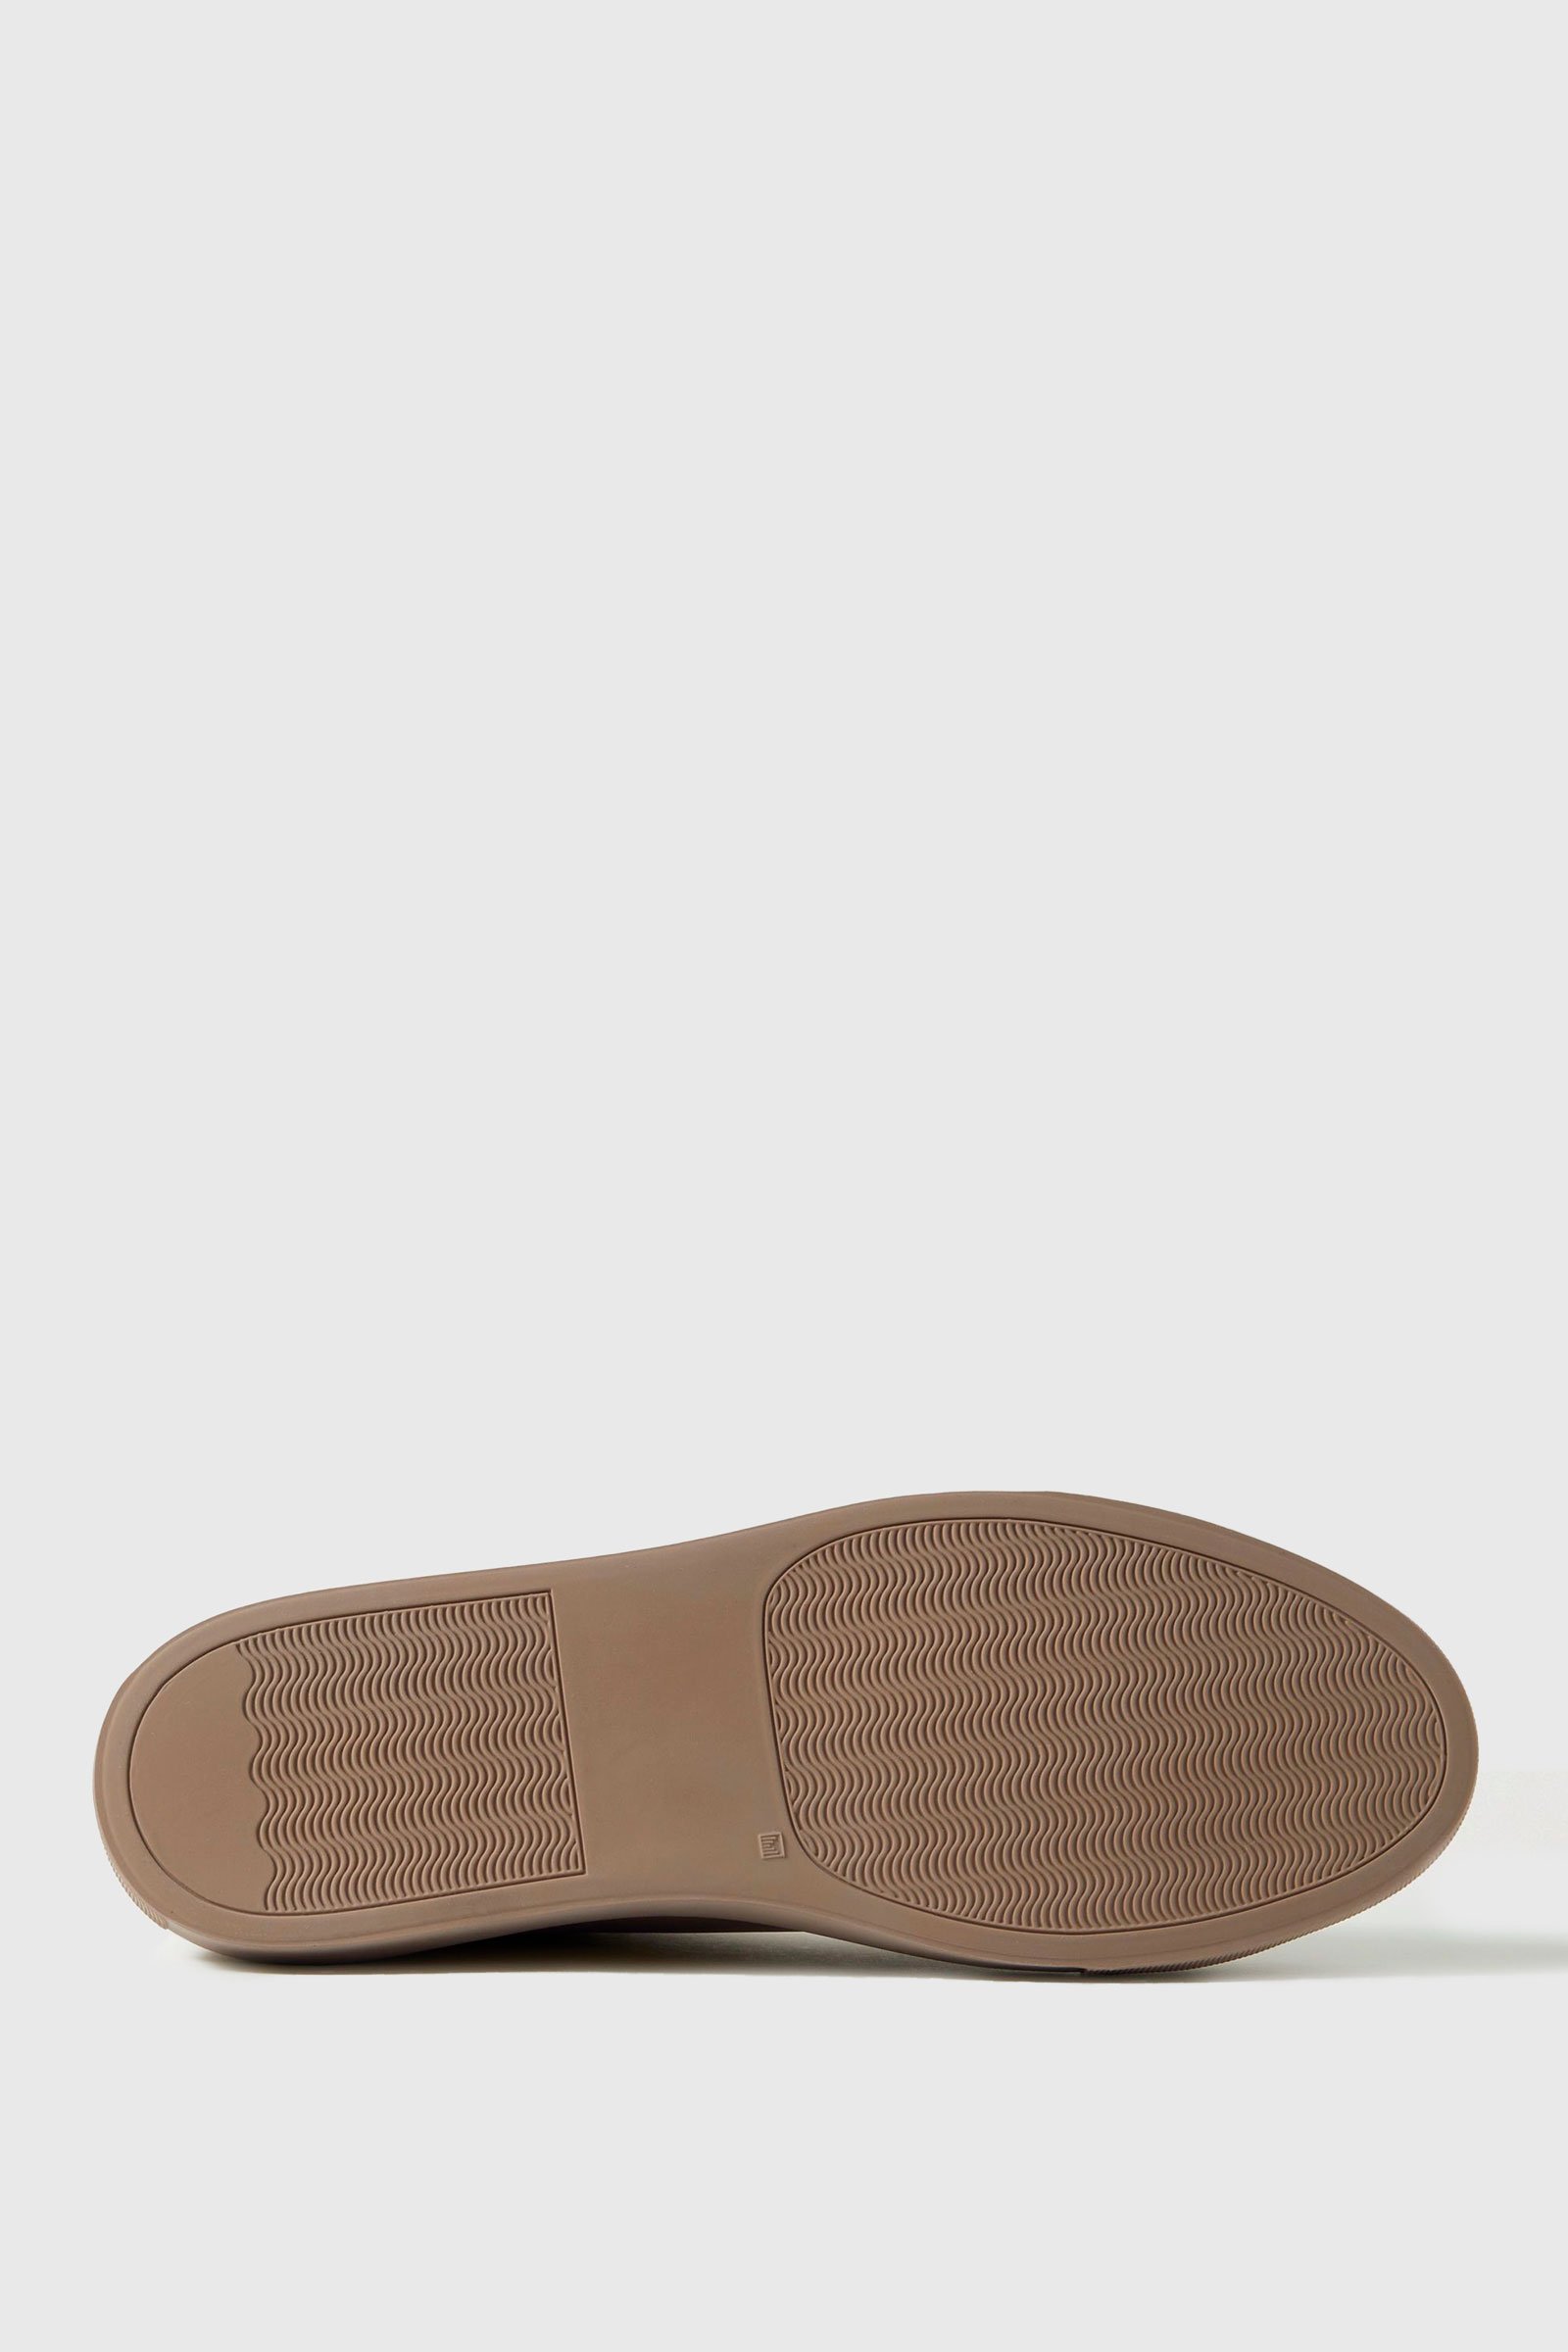 Common Projects Original Achilles Low Taupe (0240) | WoodWood.com